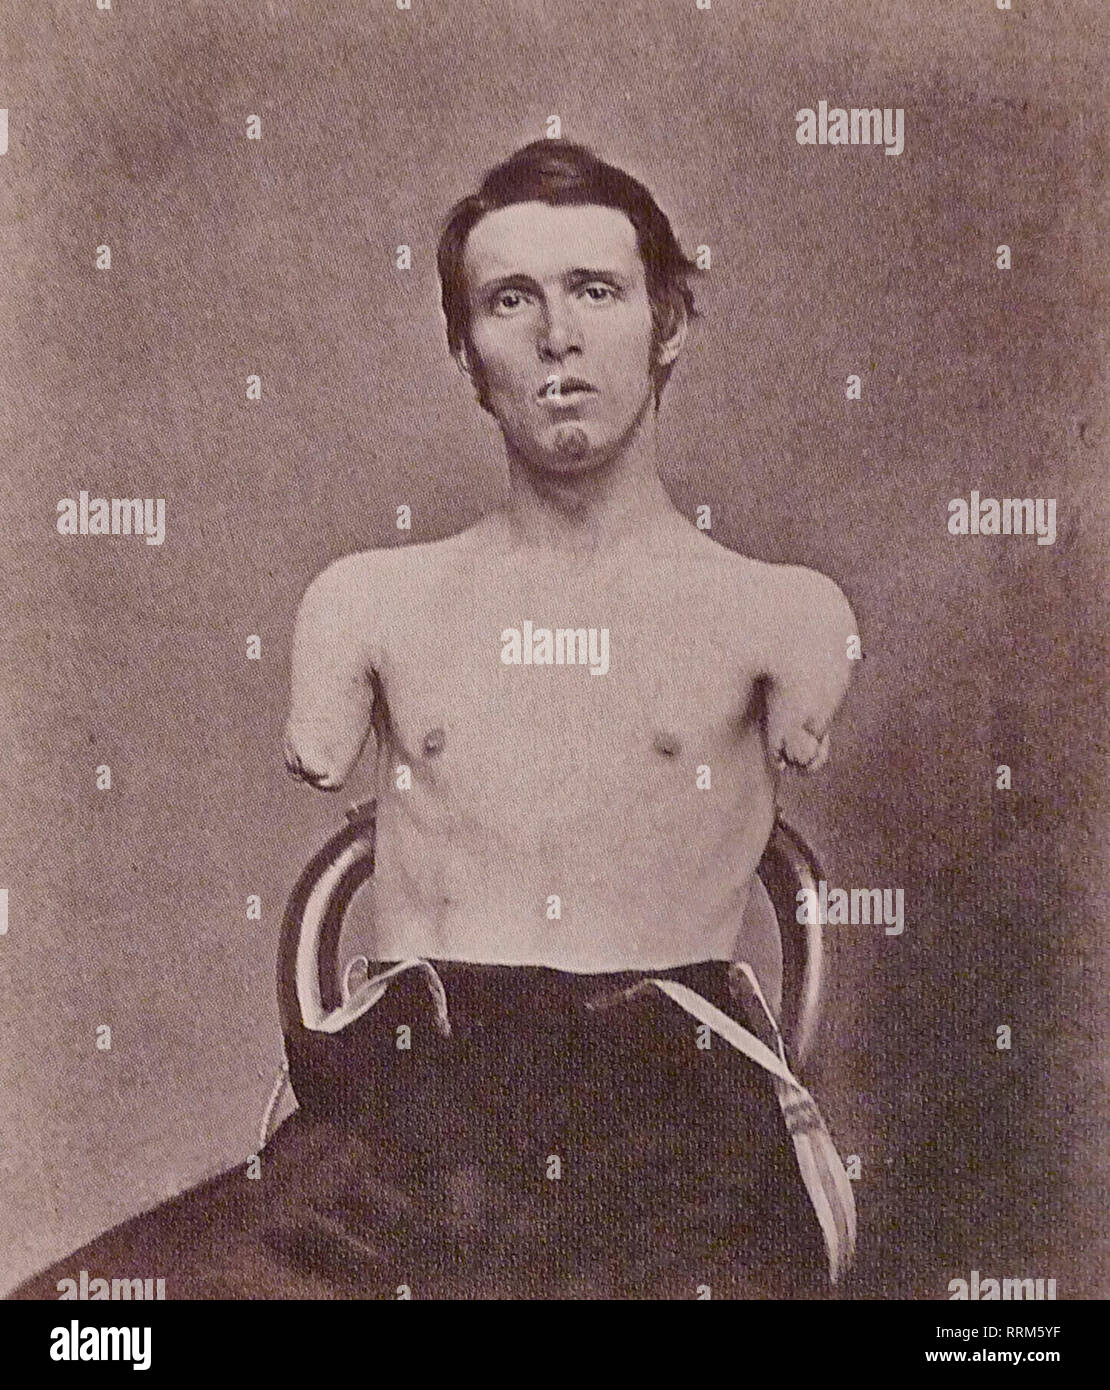 Alfred A. Stratton lost both his arms at age 19 on 18 June 1864 by a cannon shot in the American Civil War. The amputation was performed by AS Coe. Stratton died as a father of two at the age of 29. Stock Photo